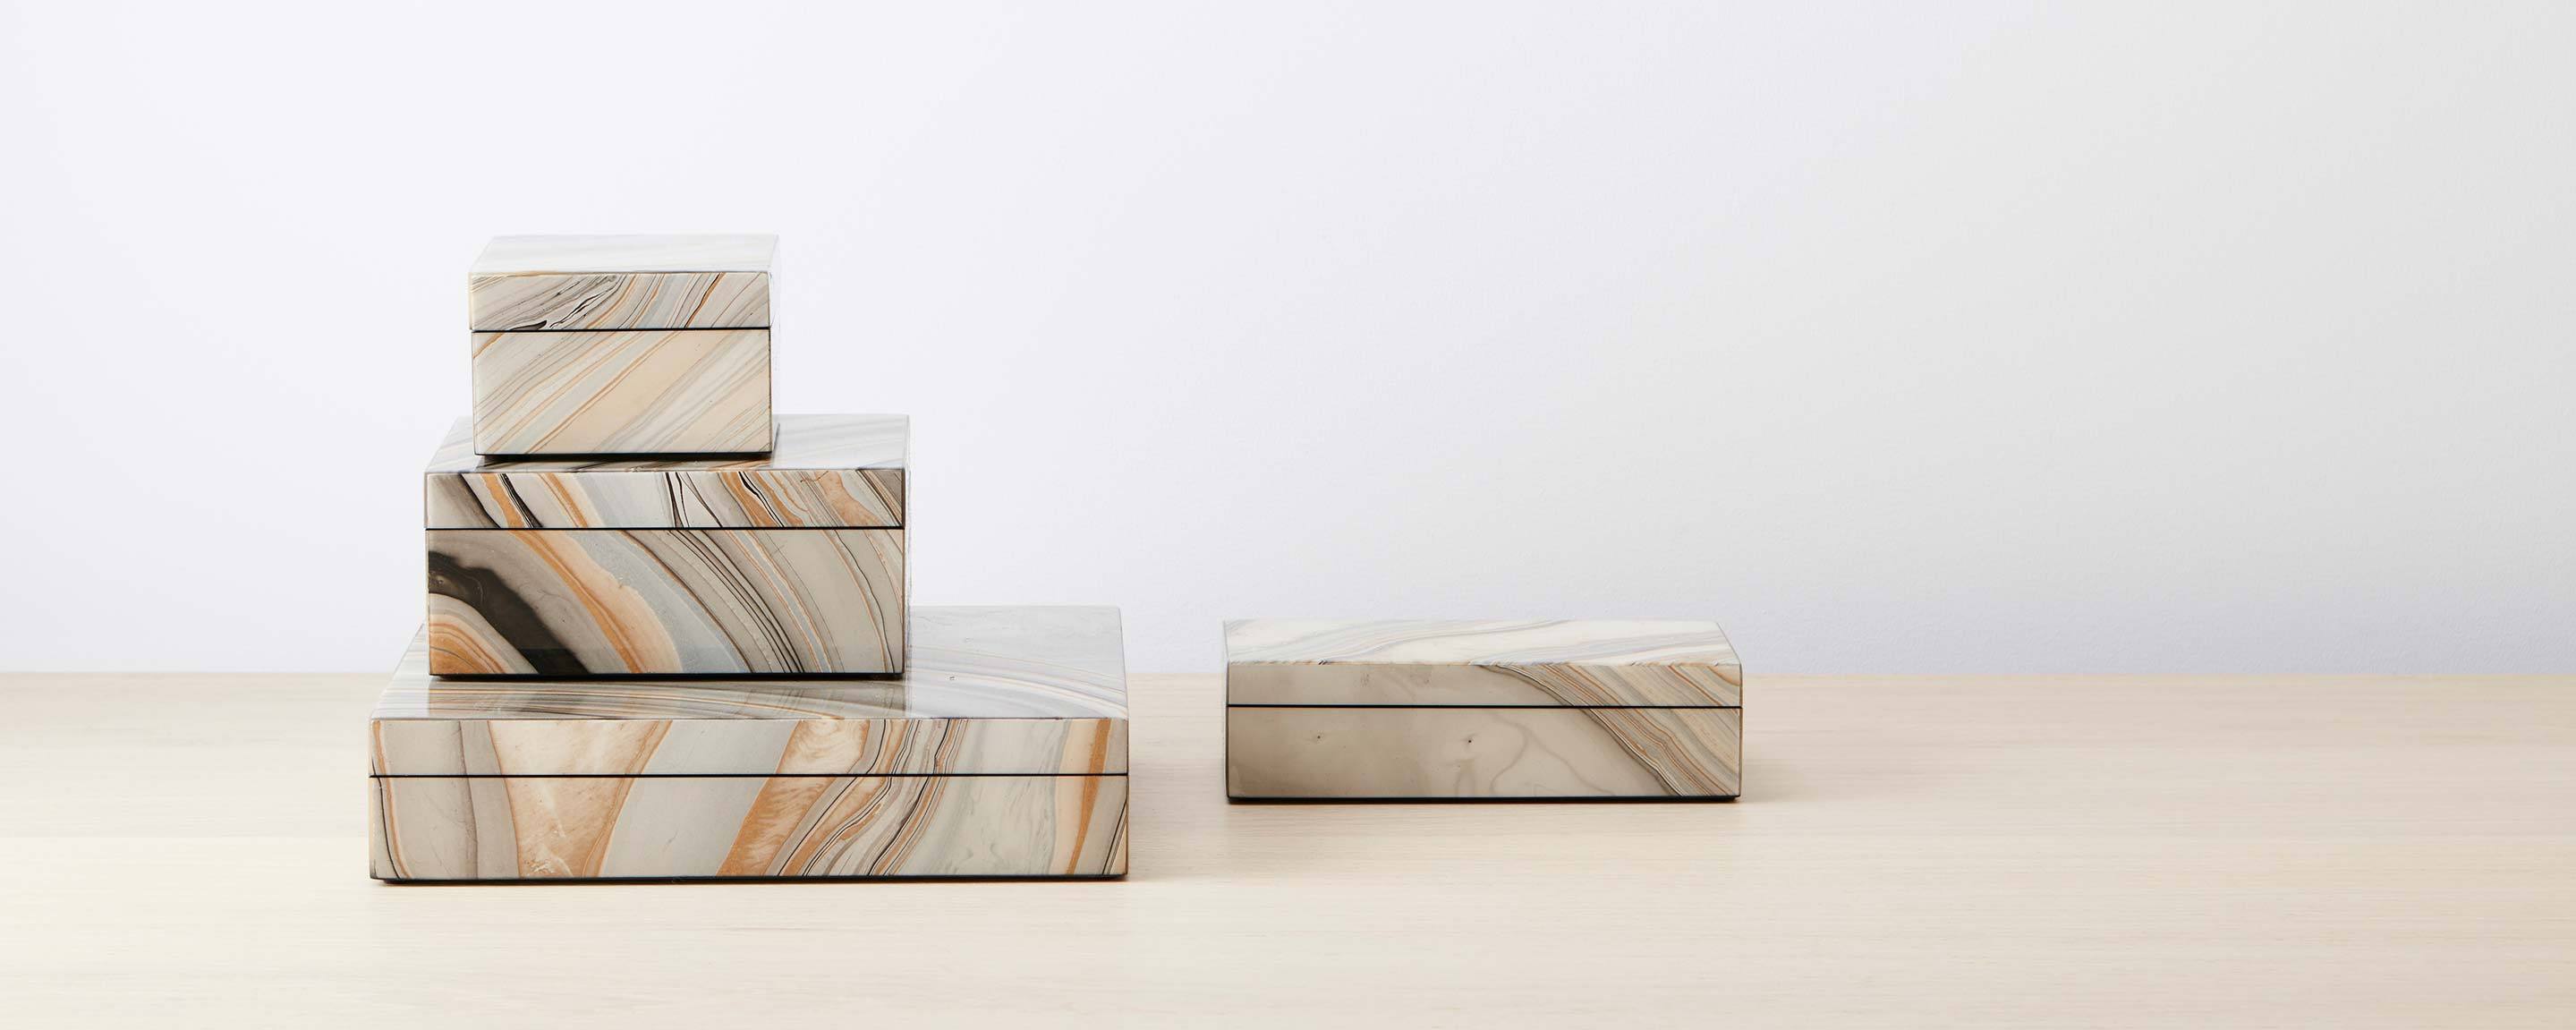 marbleized lacquer boxes